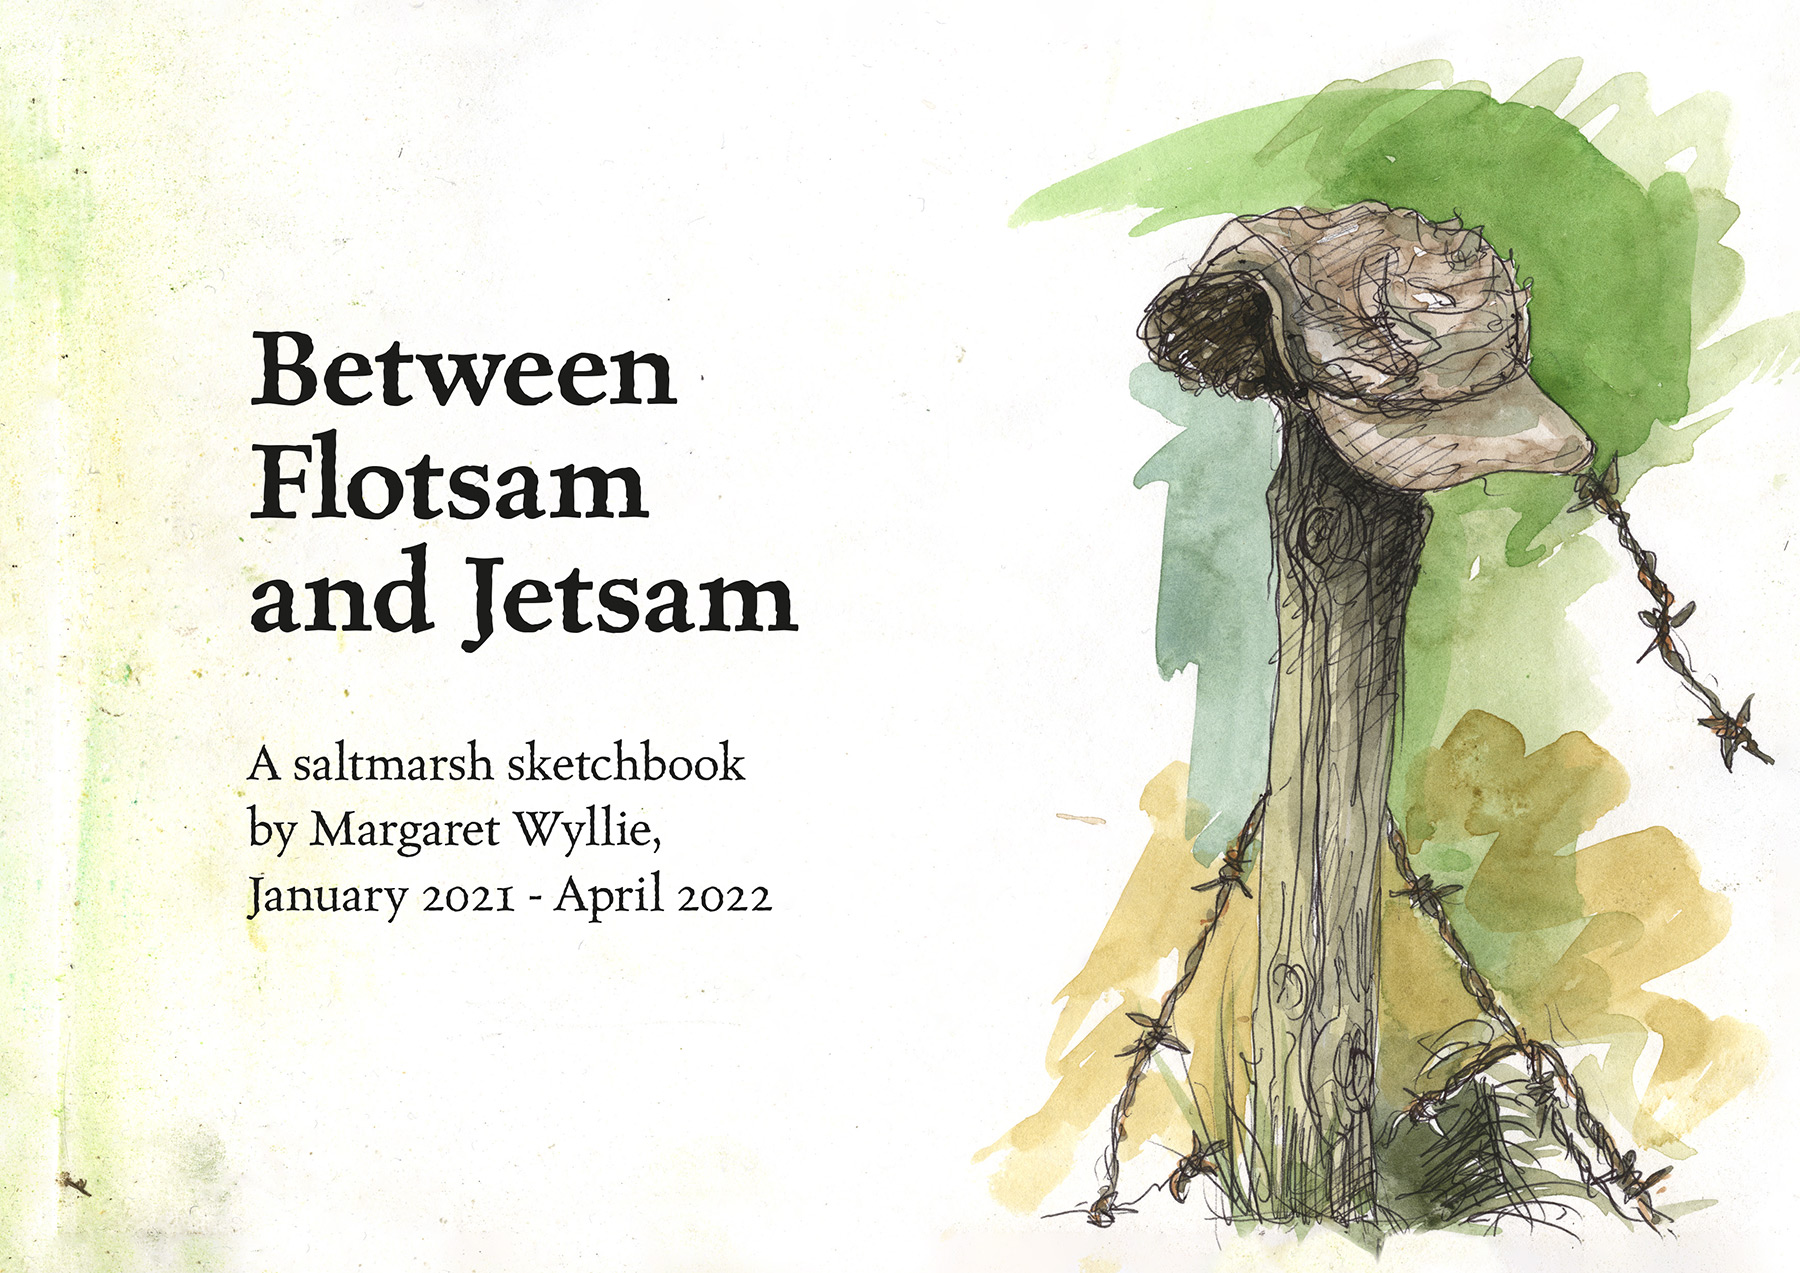 Click to buy your copy of 'Between Flotsam and Jetsam' by Margaret Wyllie